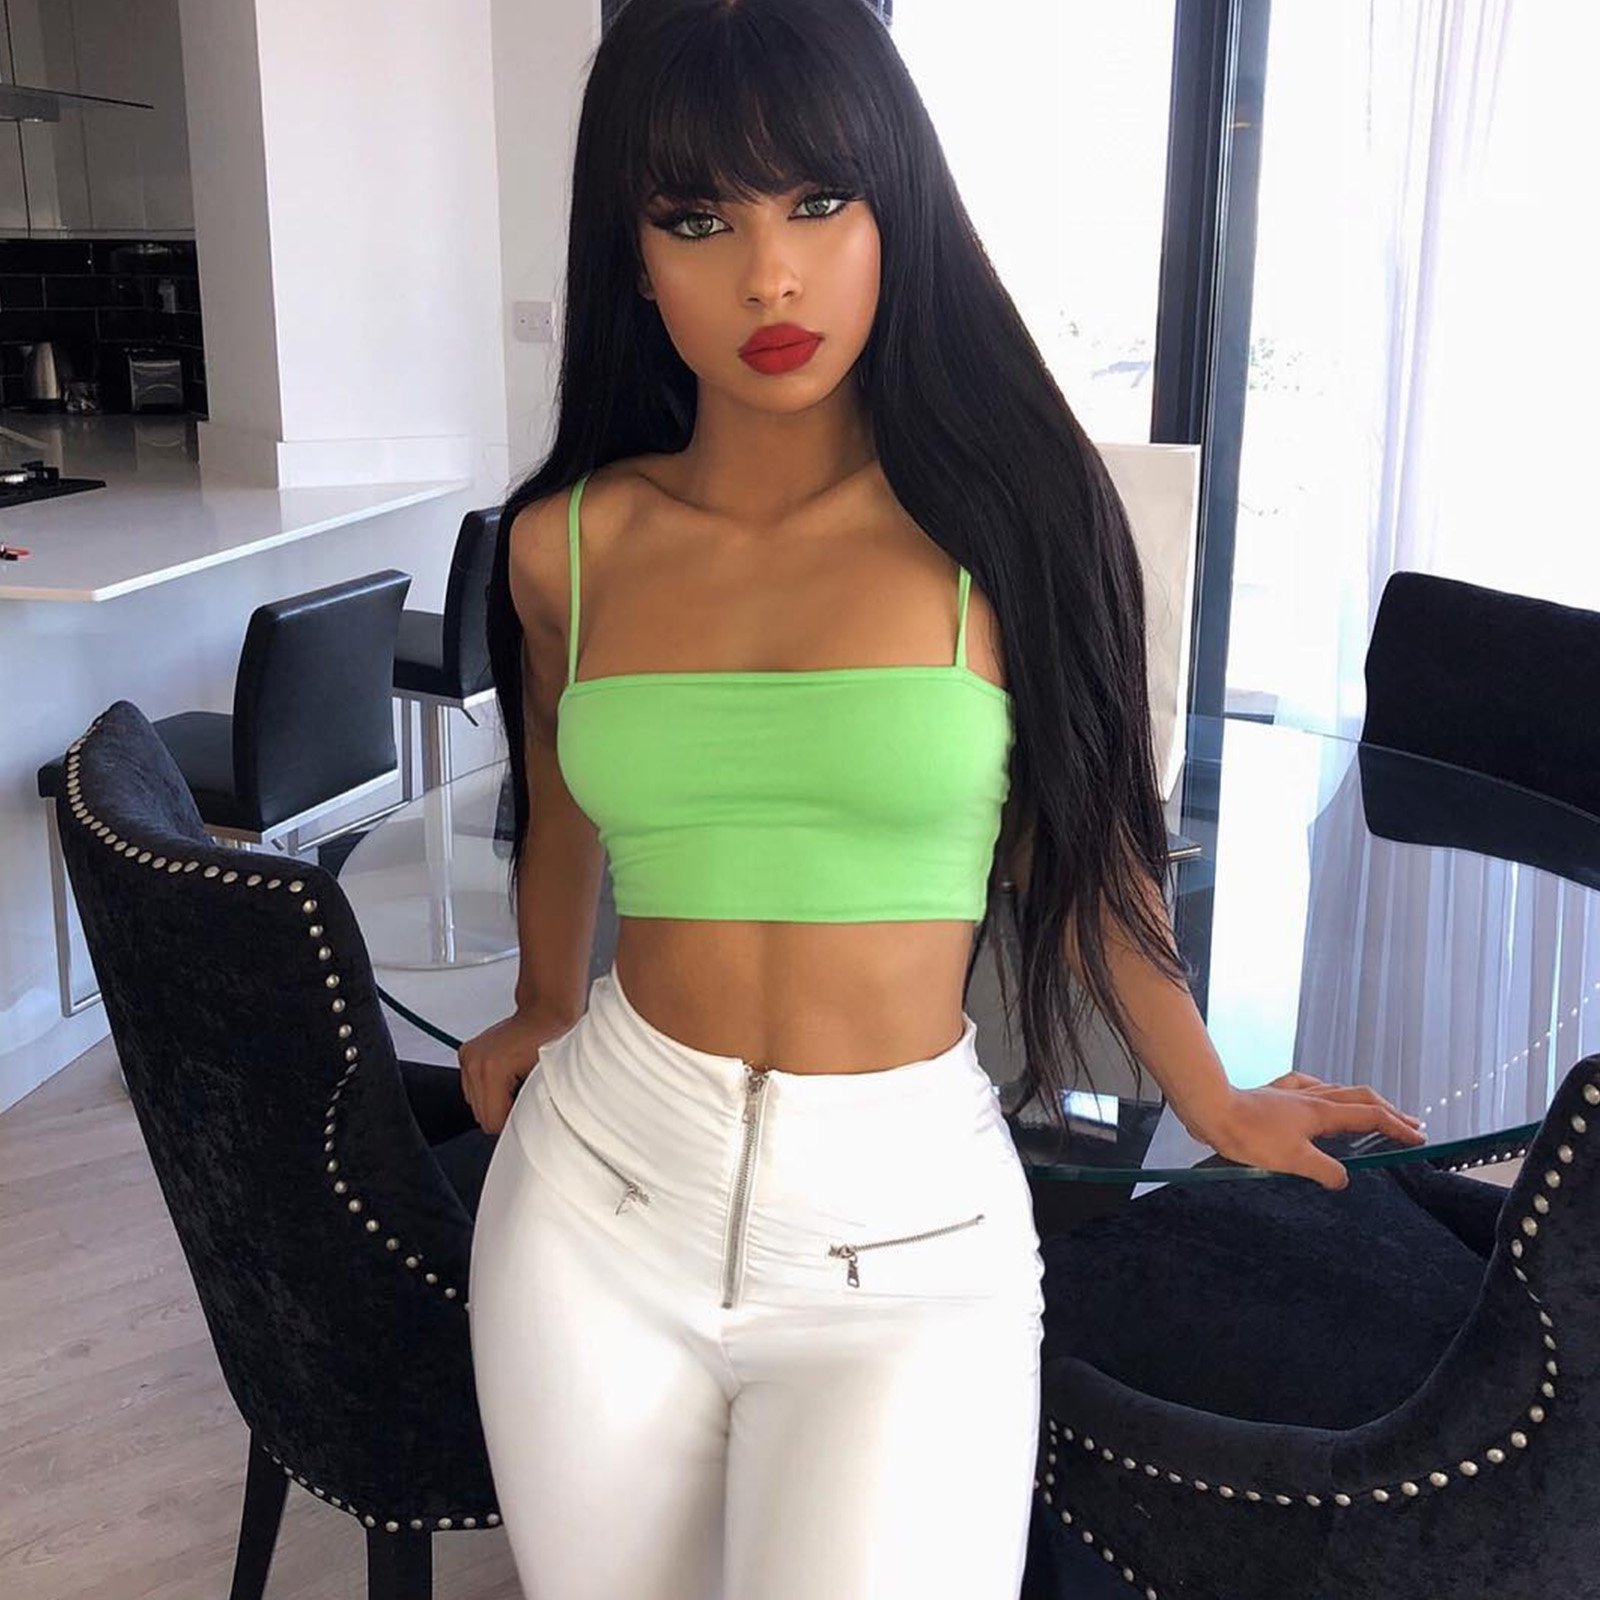 Oh Polly on Twitter: "Show up LATE-X 🔥 Our girl styles the 'Simple That' Crop Top in Lime the 'Zip Into Shape' White Vinyl Trousers: https://t.co/GSHGLIQTG5 https://t.co/H3zqZBnTWd" /